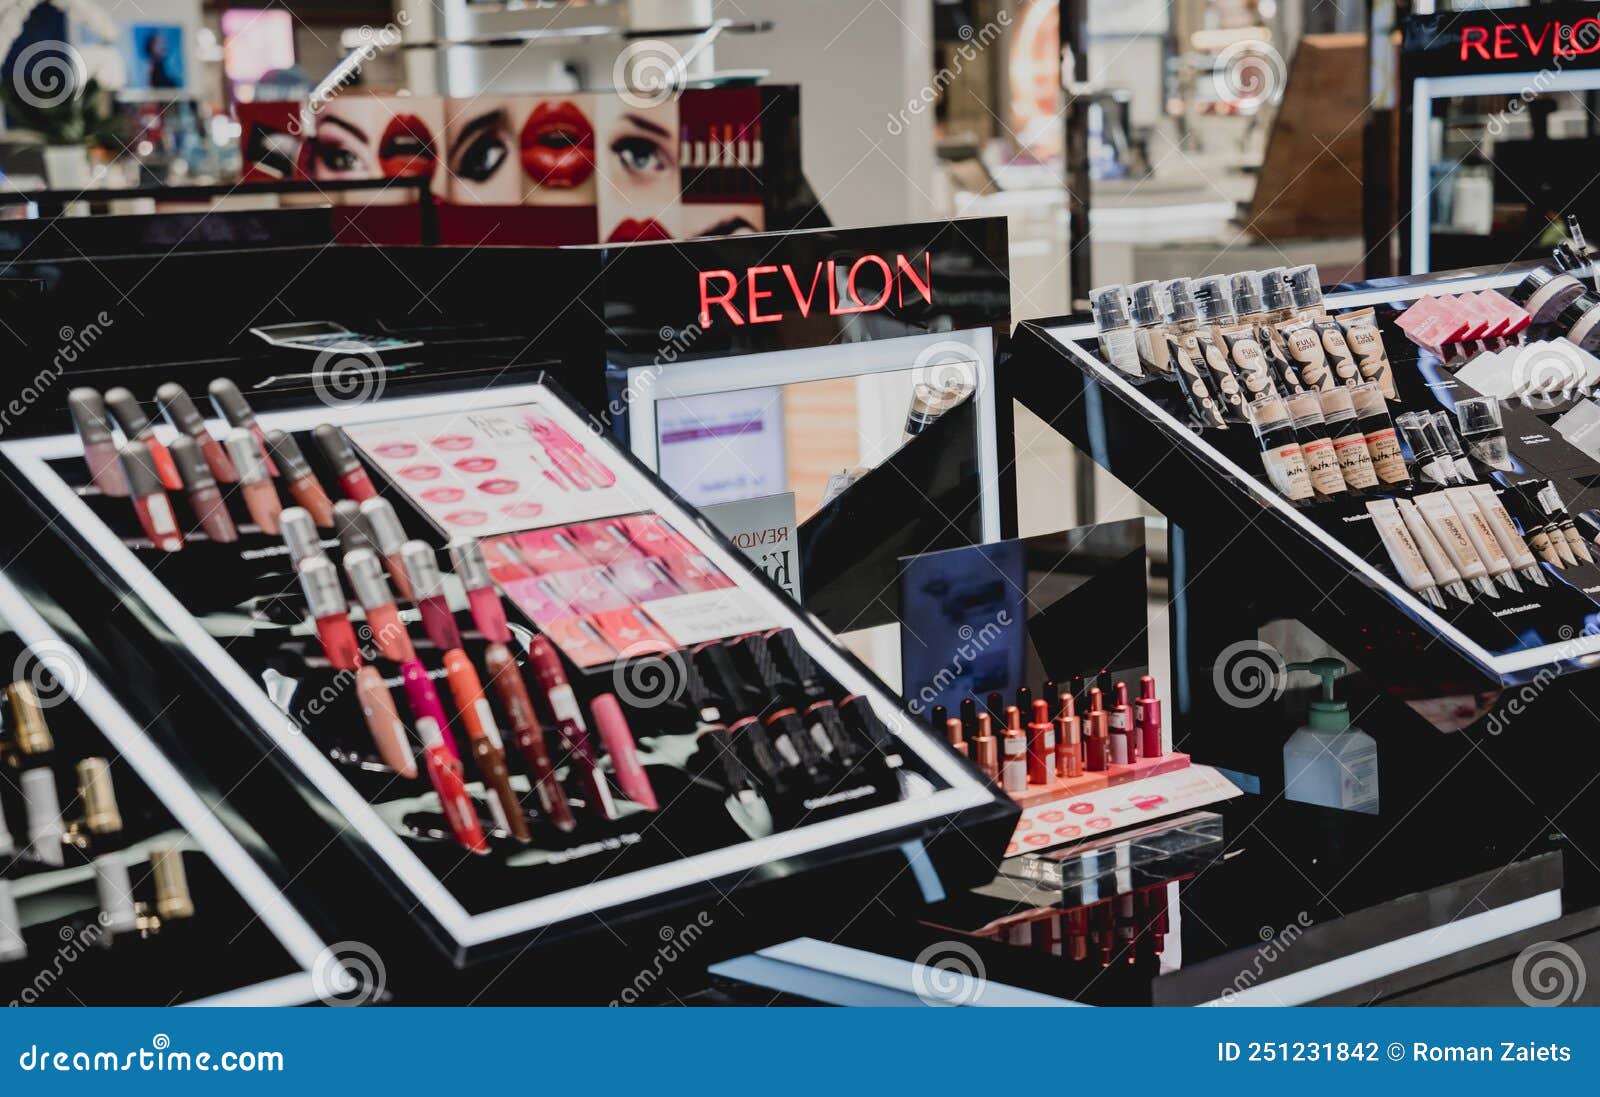 PHUKET, THAILAND - MAY 29, 2022: a Rows of Revlon Brand Lipsticks in a Case  on the Supermarket Showcase Editorial Photography - Image of party,  products: 251231842